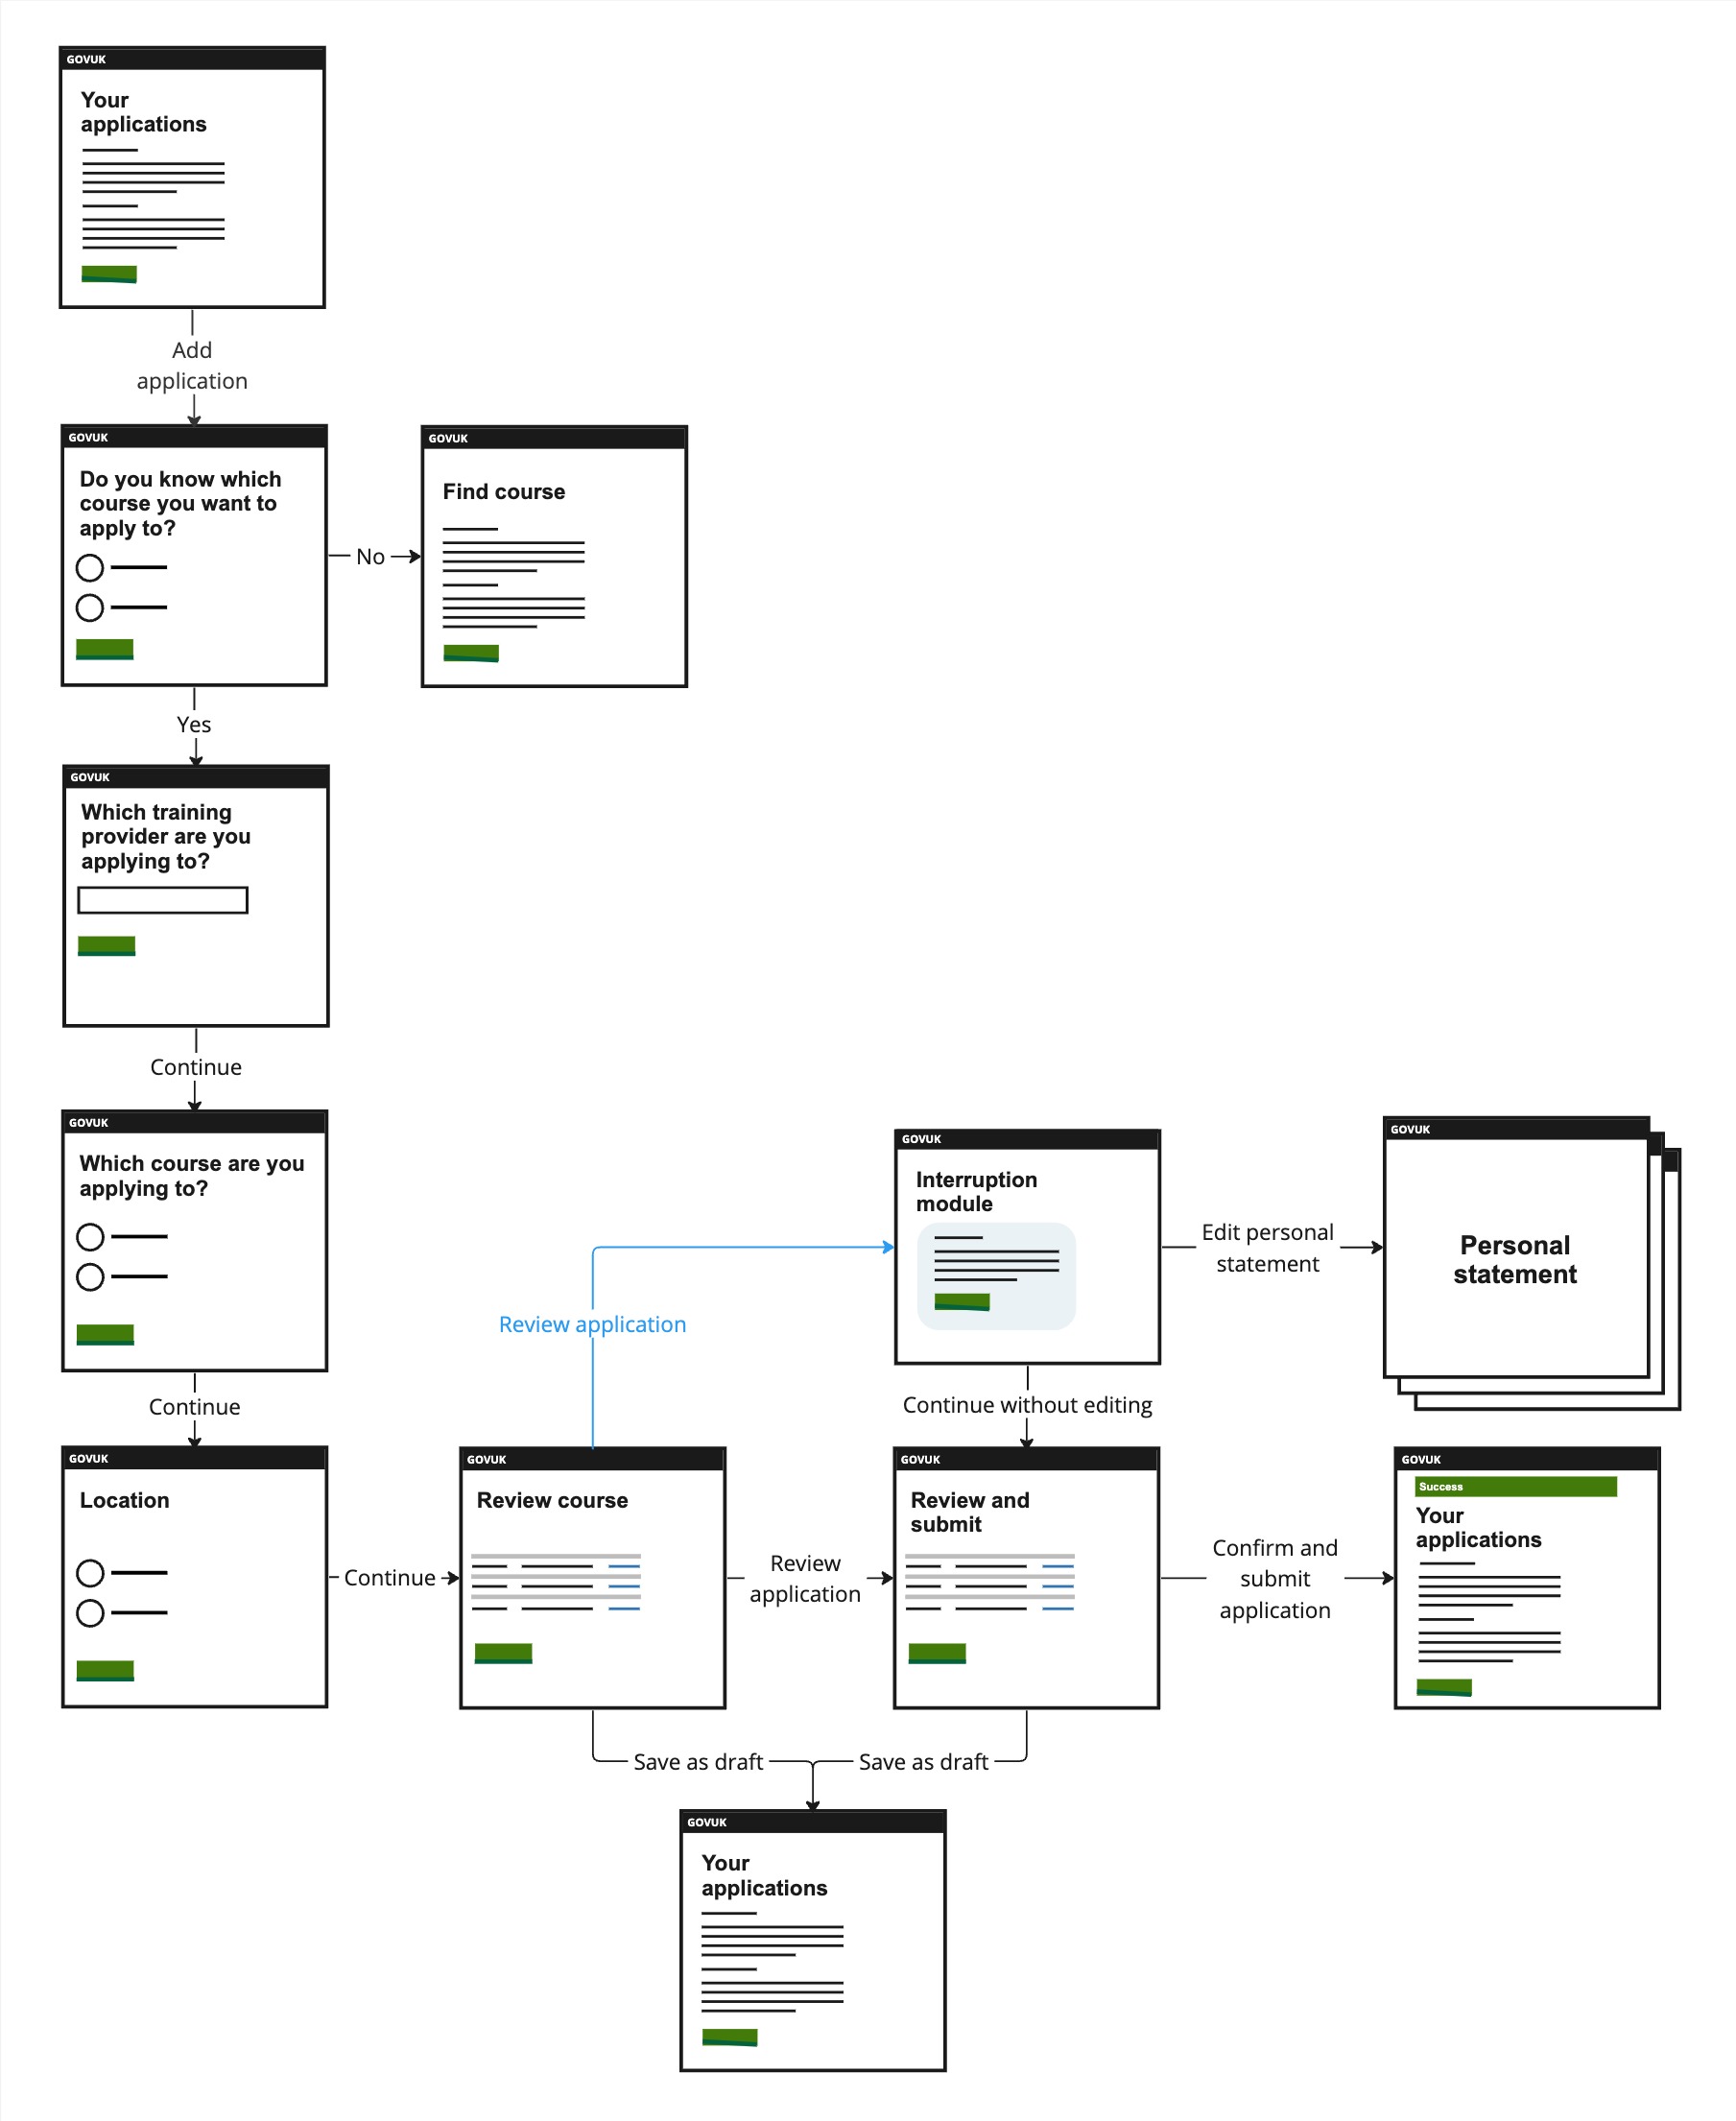 Image of the user flow for interruption modul integrated into the application process